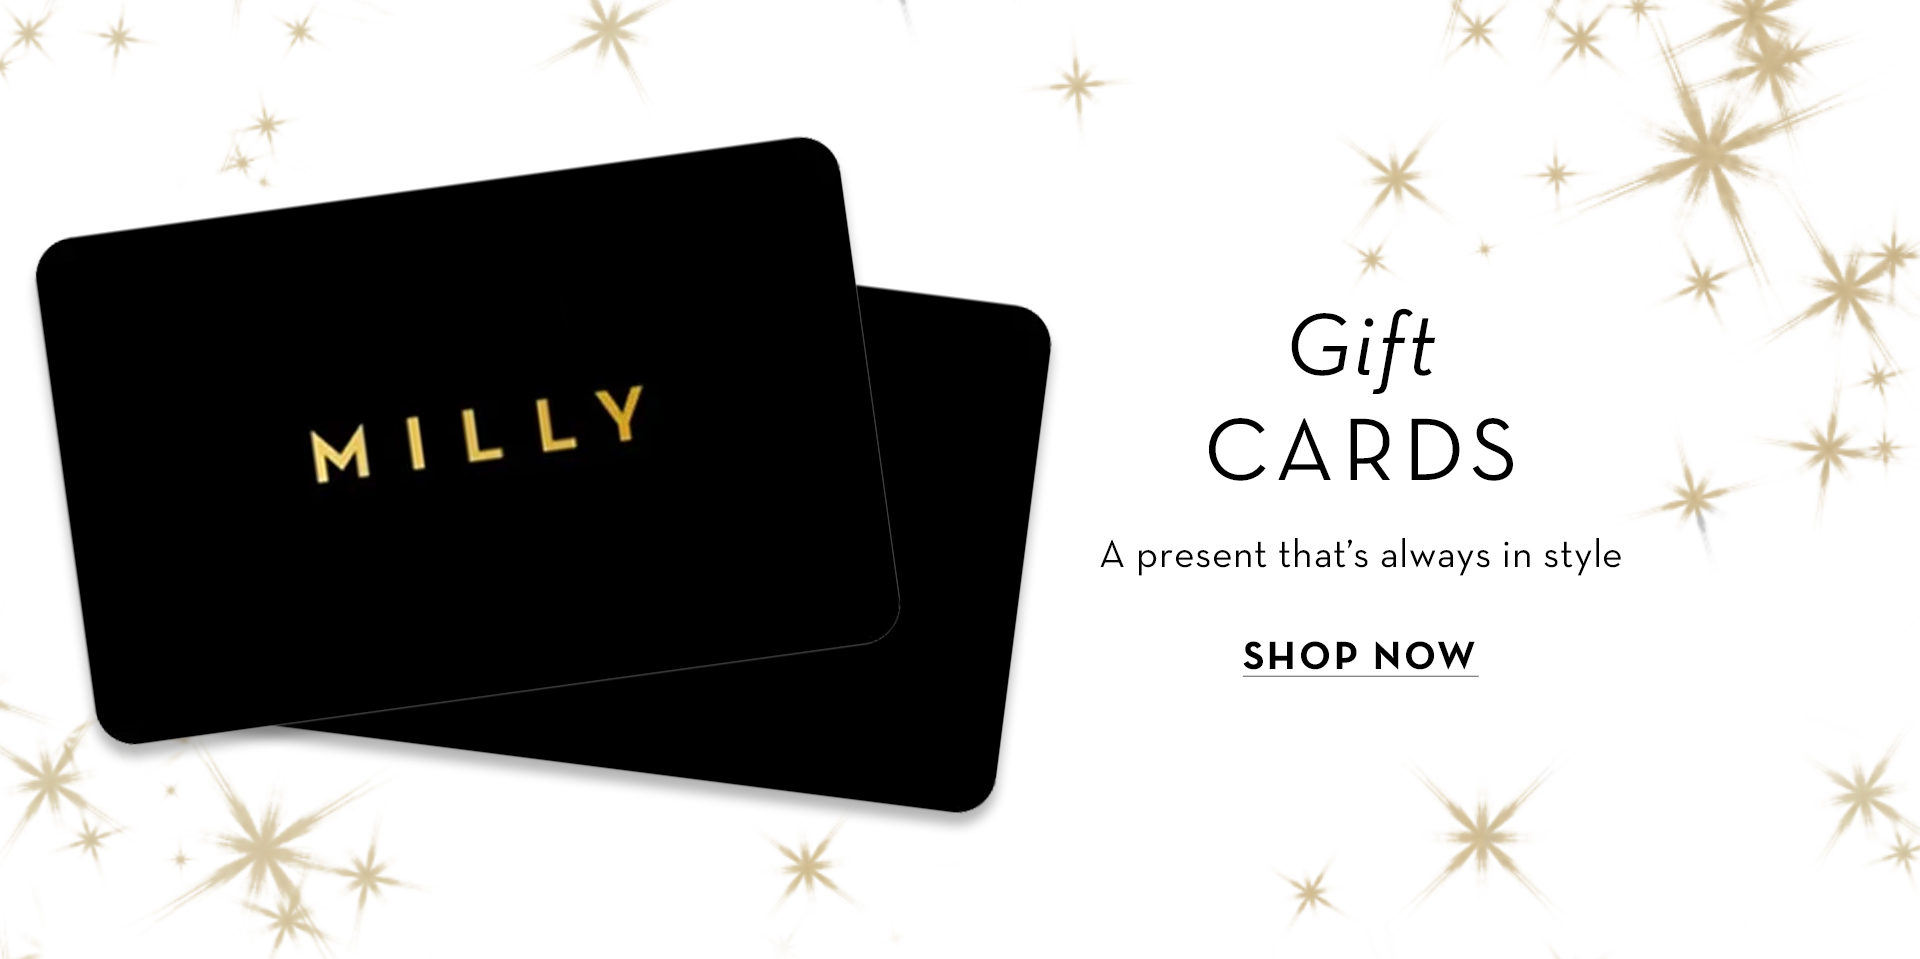 Gift Cards a present that is always in style